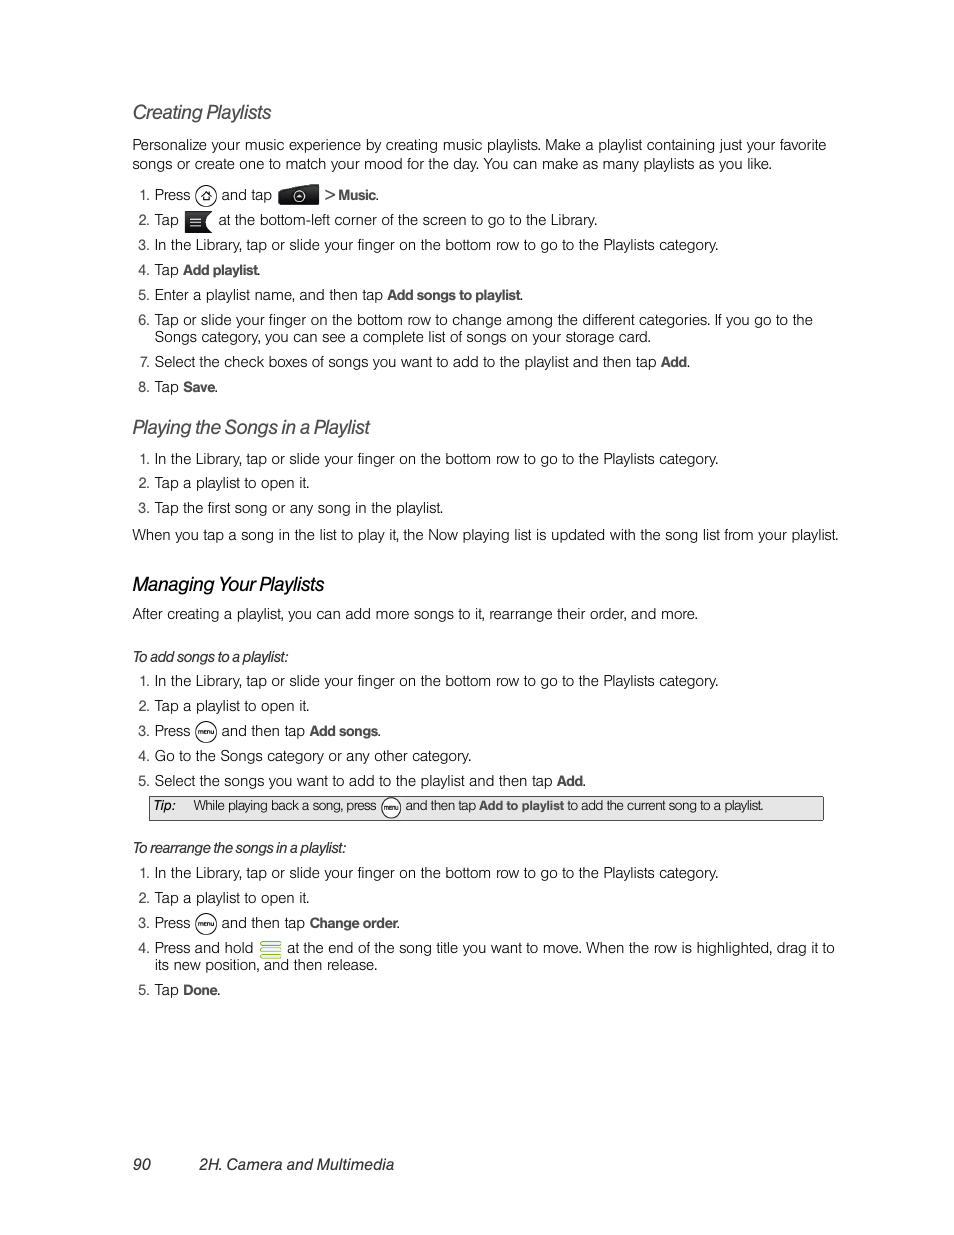 Creating playlists, Playing the songs in a playlist, Managing your playlists | HTC EVO 4G User Manual | Page 100 / 197